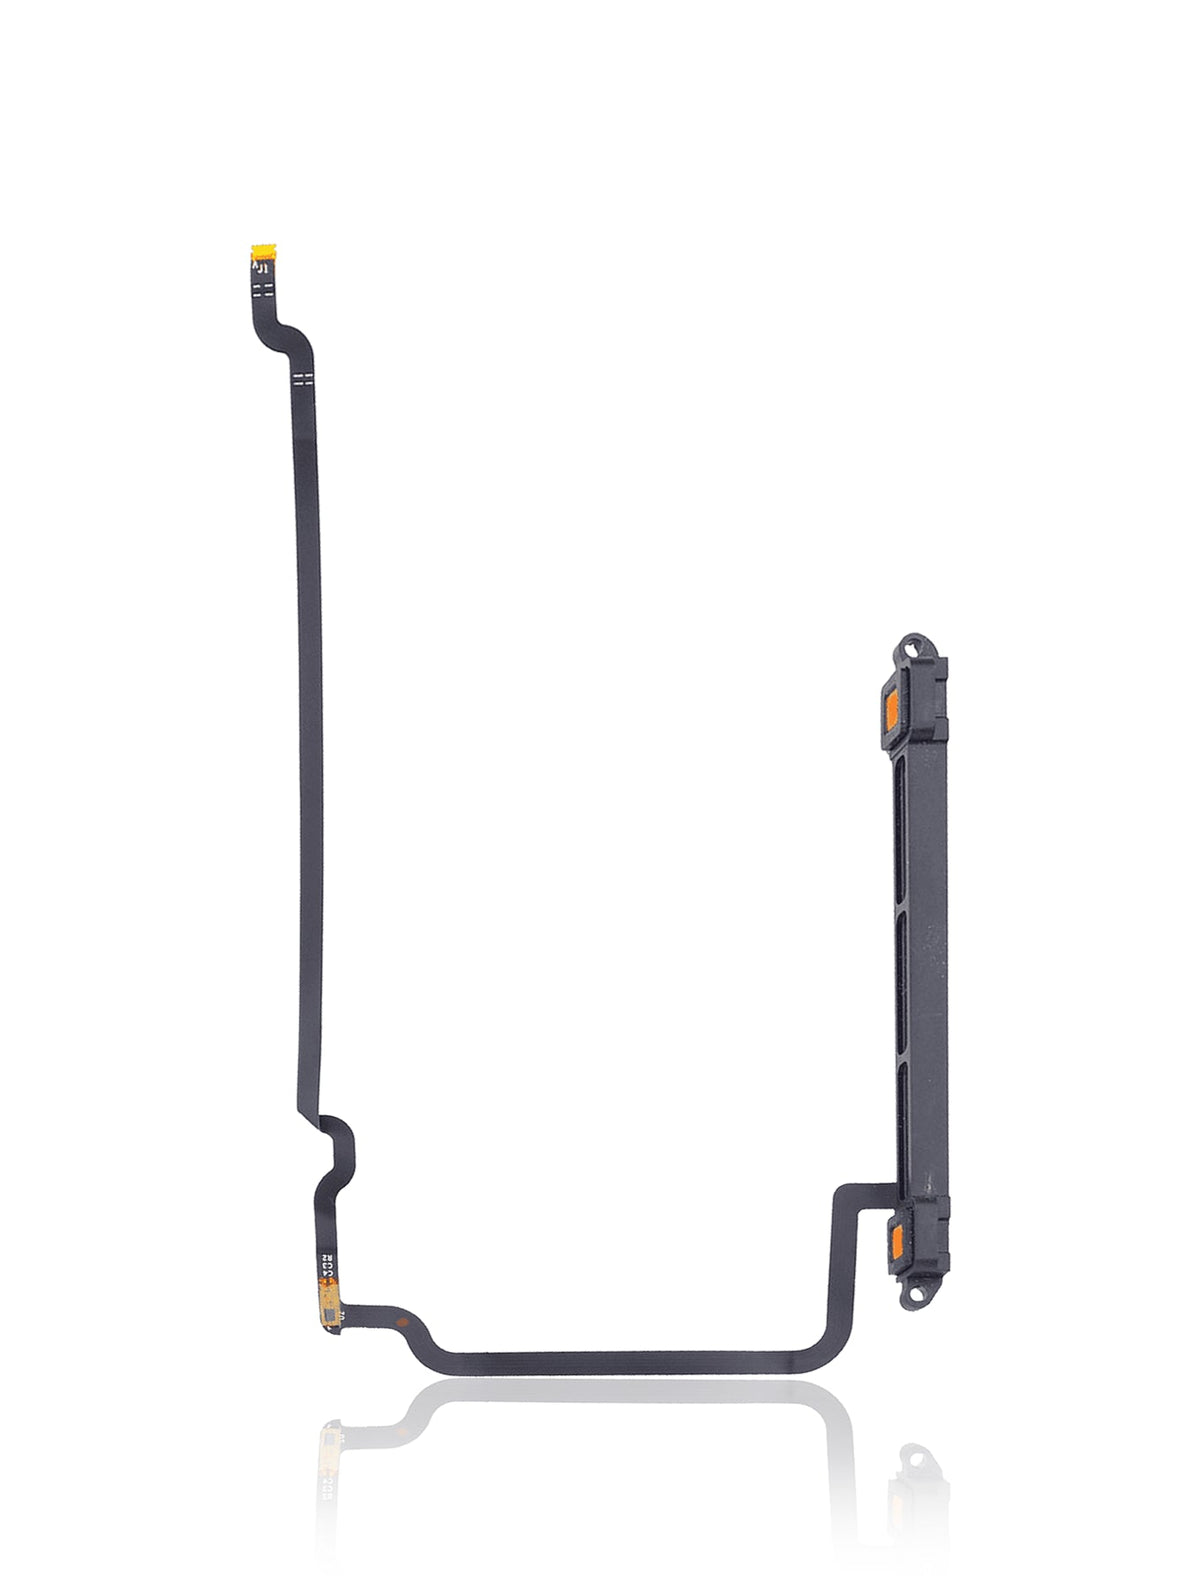 HARD DRIVE CABLE FOR MACBOOK UNIBODY 13" A1278  (LATE 2008)